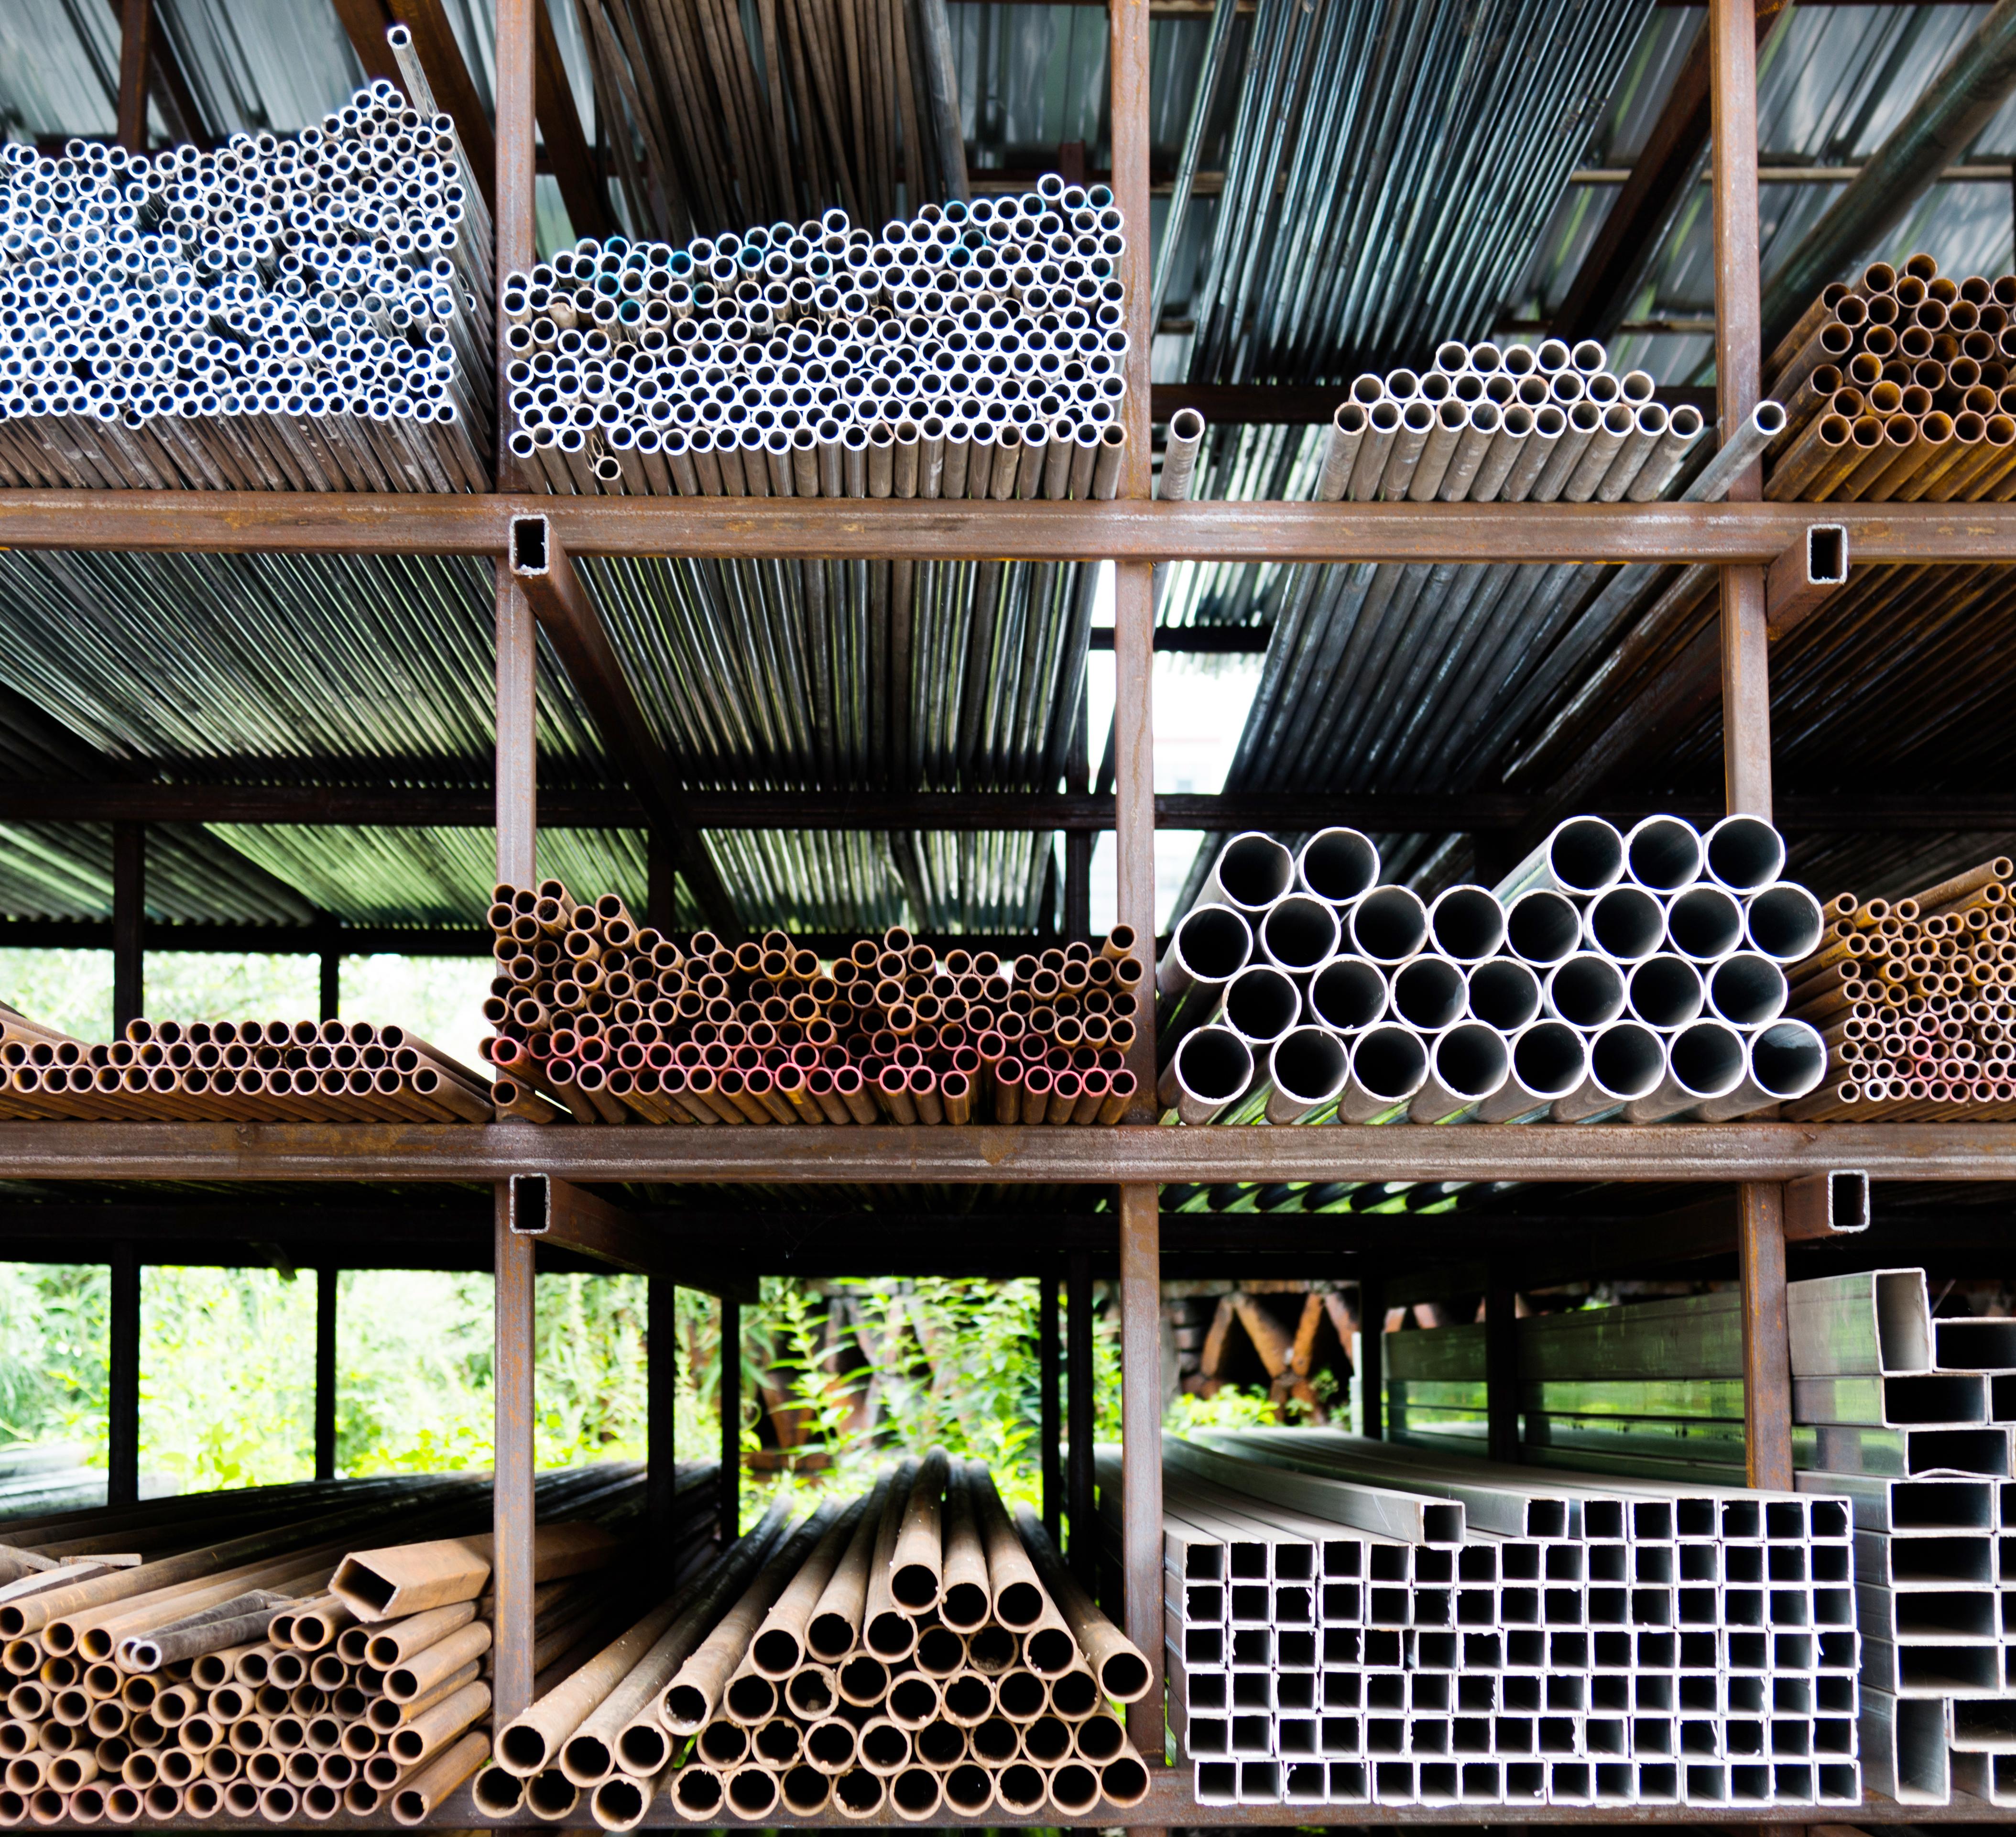 Different sizes of steel tubes on a stock shelf